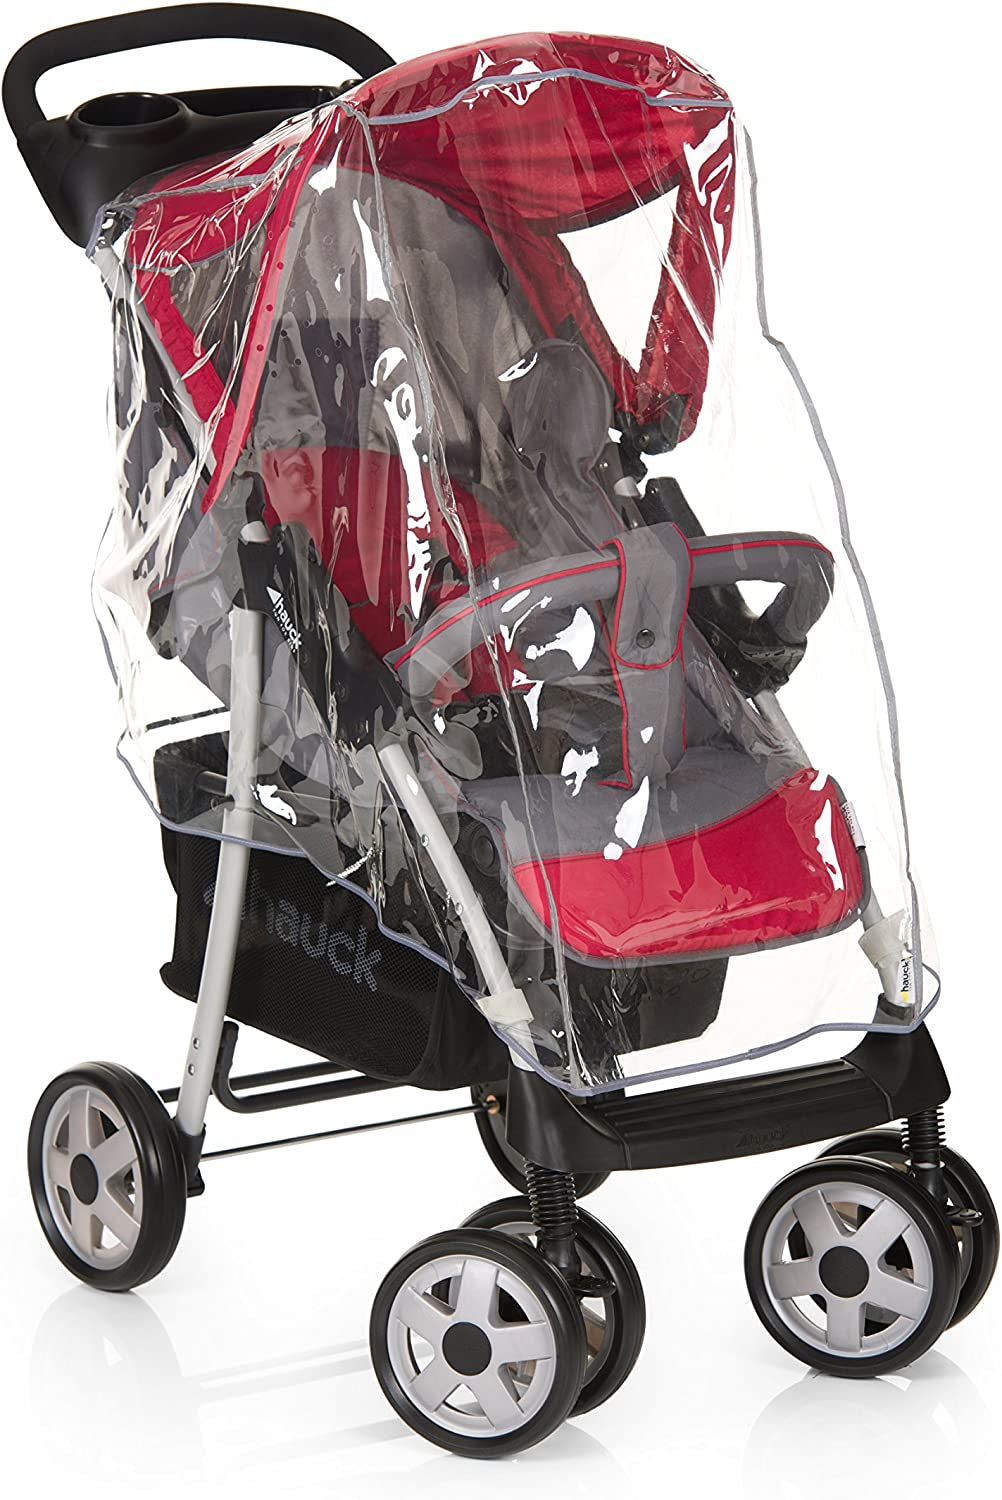 Hauck Universal Raincover for Shopper Pushchair Stroller, Water Resistant and Durable Transparent